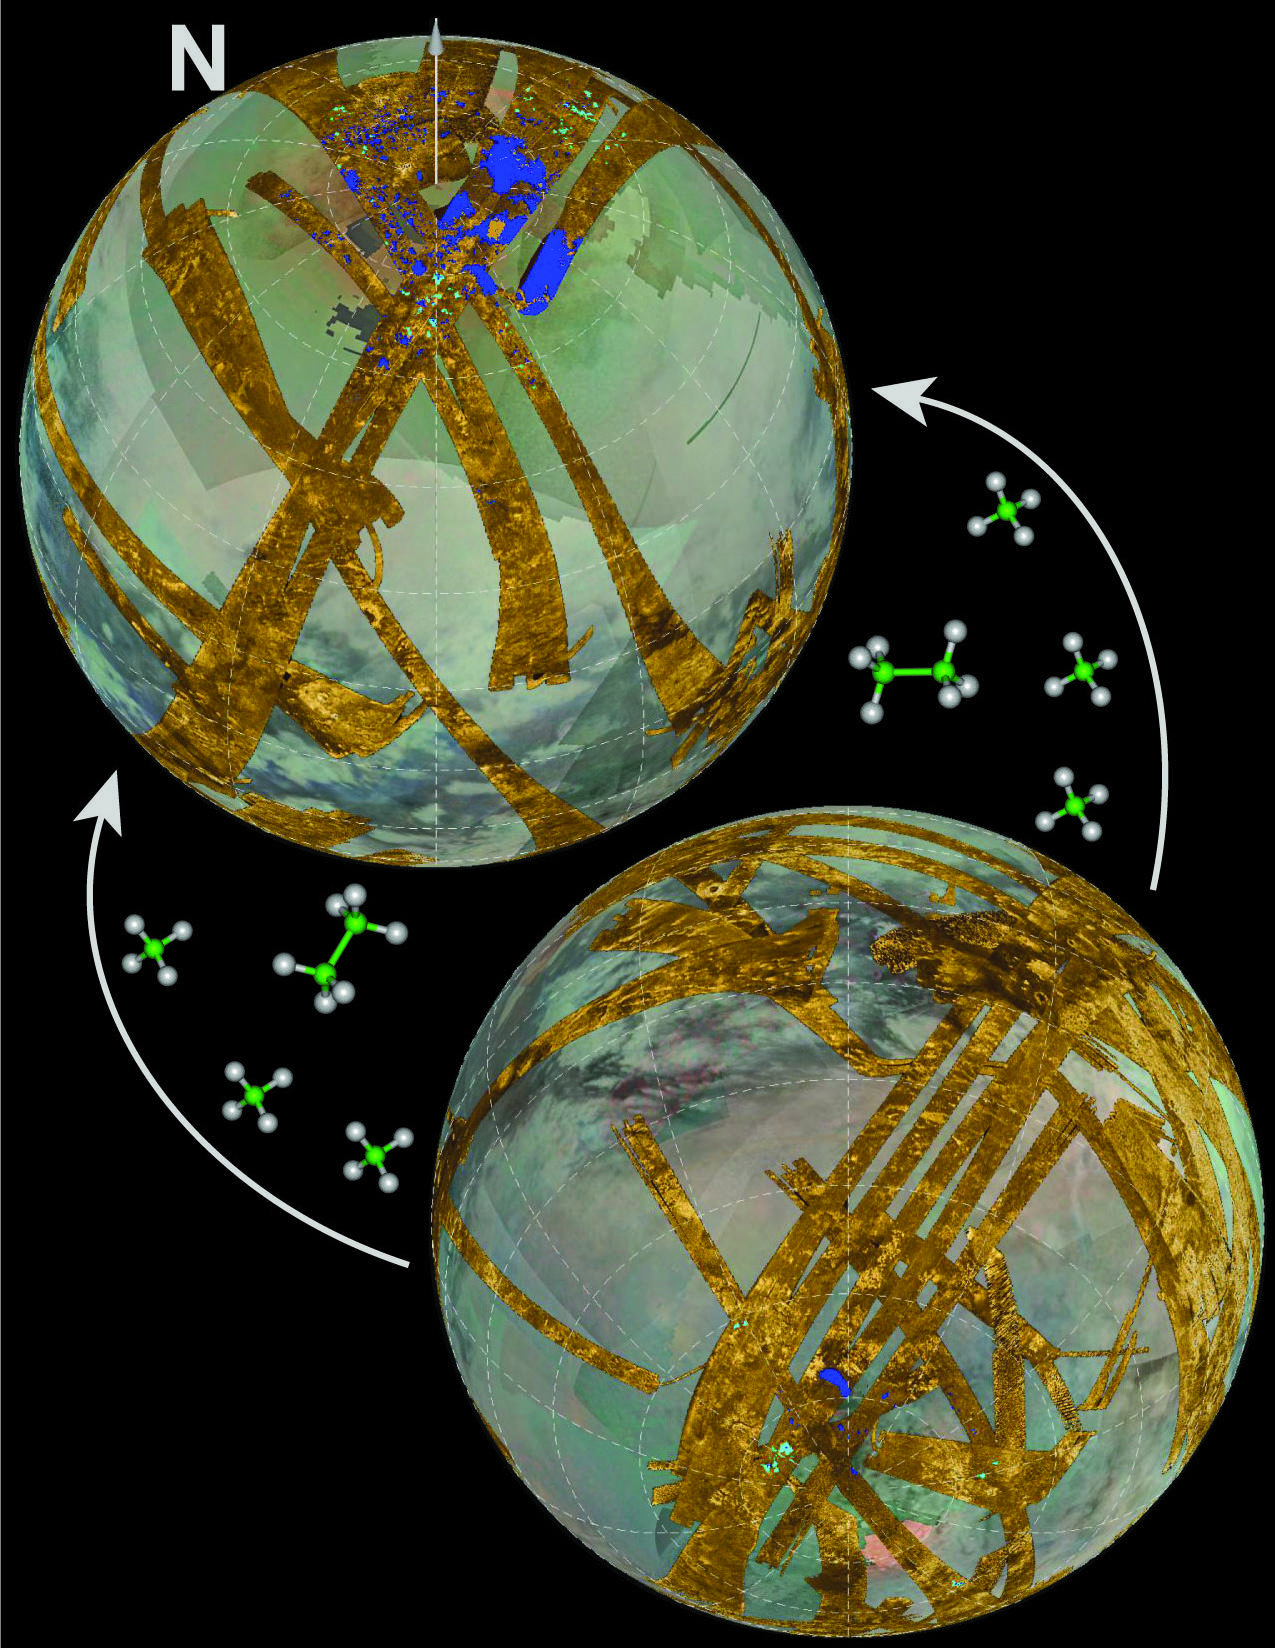 The northern and southern hemispheres of Titan, showing the disparity between the abundance of lakes in the north and their paucity in the South.